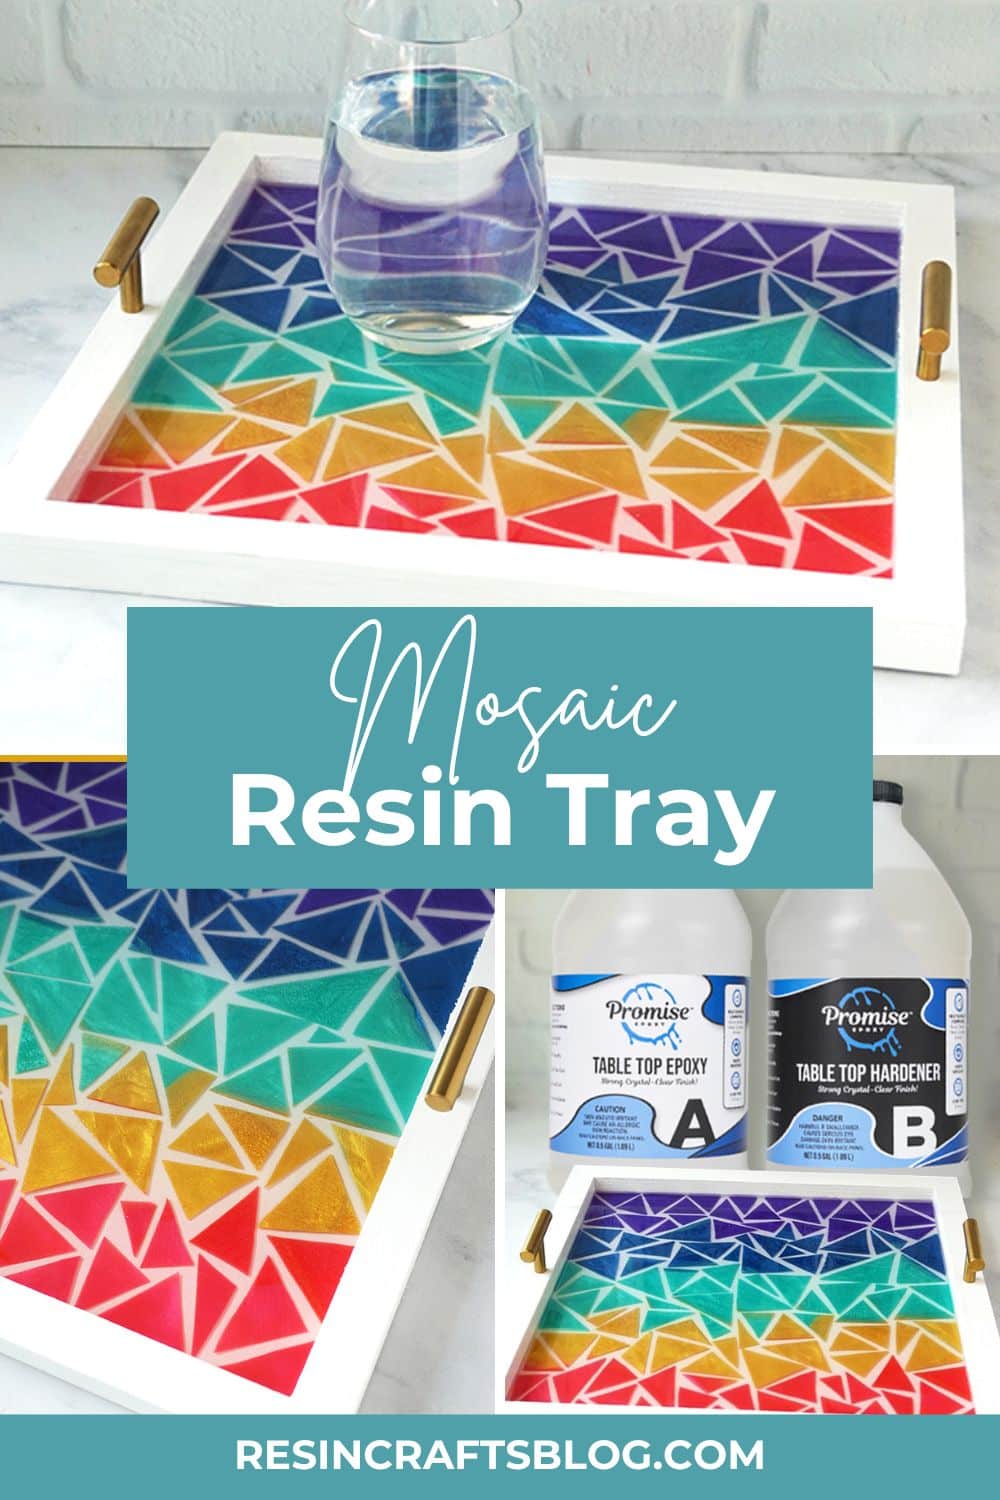 How to make a mosaic resin tray with leftover resin pieces. via @resincraftsblog